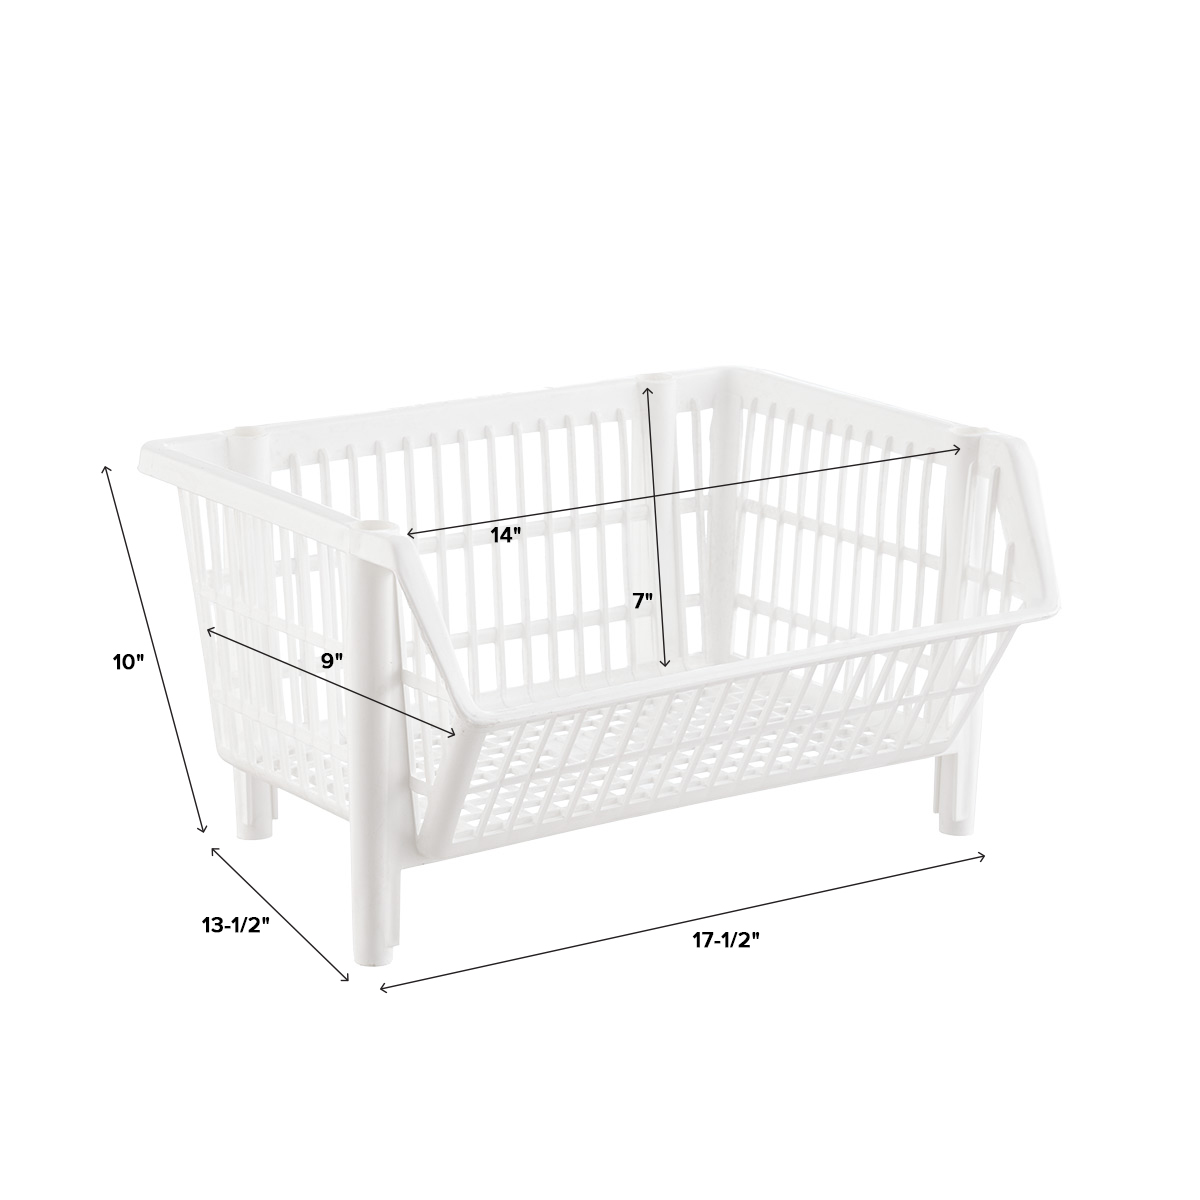 https://www.containerstore.com/catalogimages/475647/133010OurBasicStackBasketWht-DIM.jpg